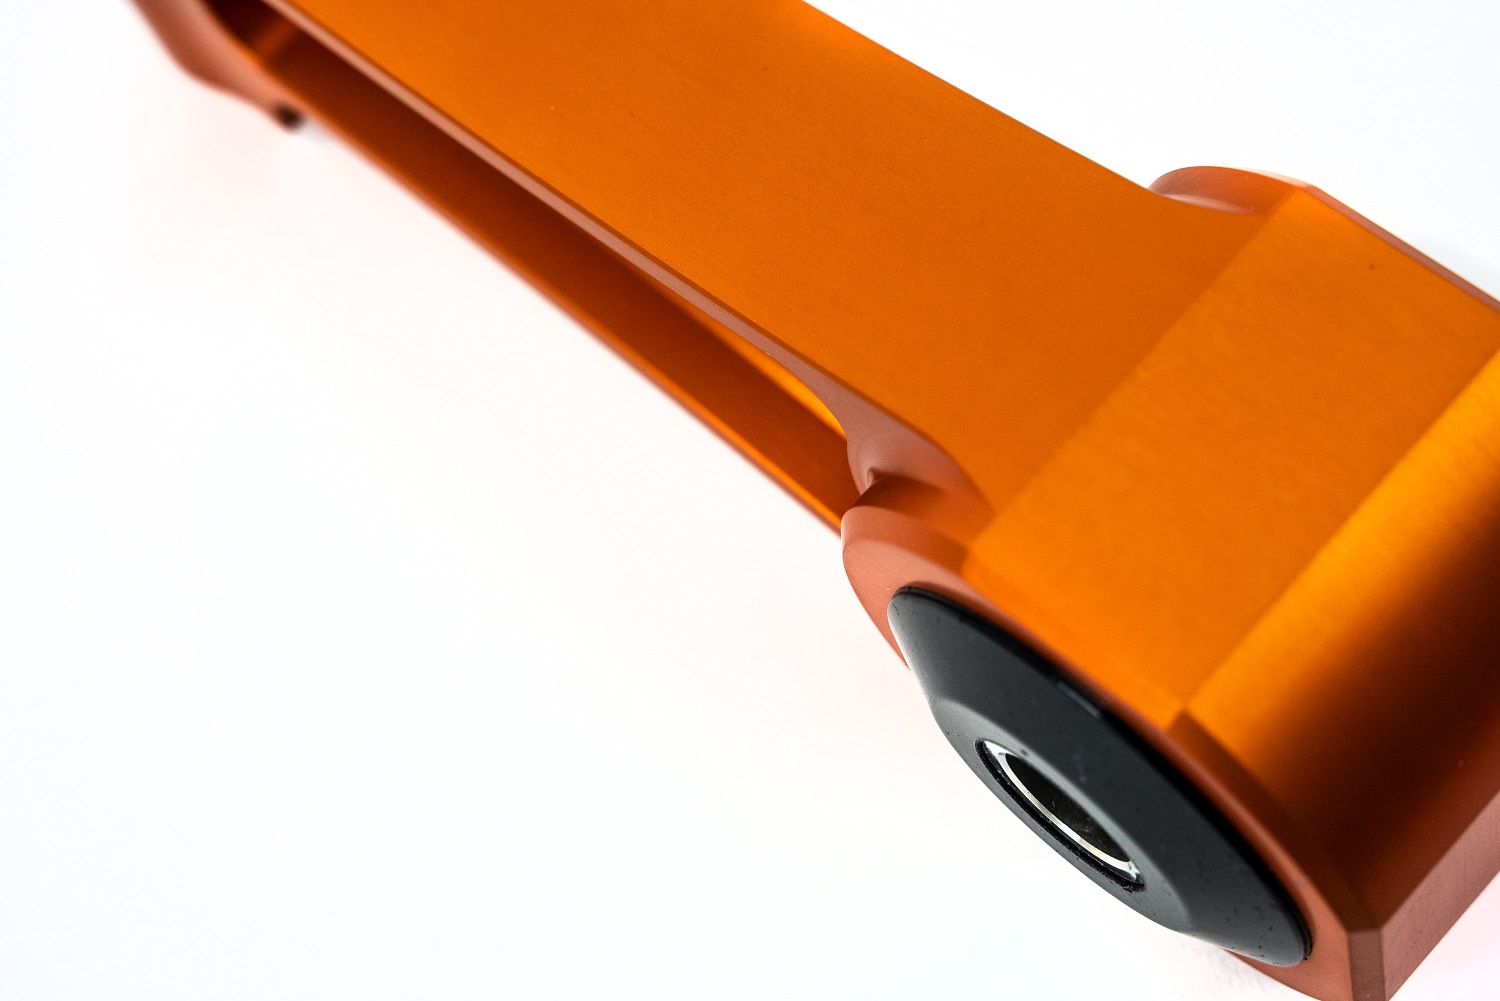 Check out our Orange anodize finish on our Billet mounts